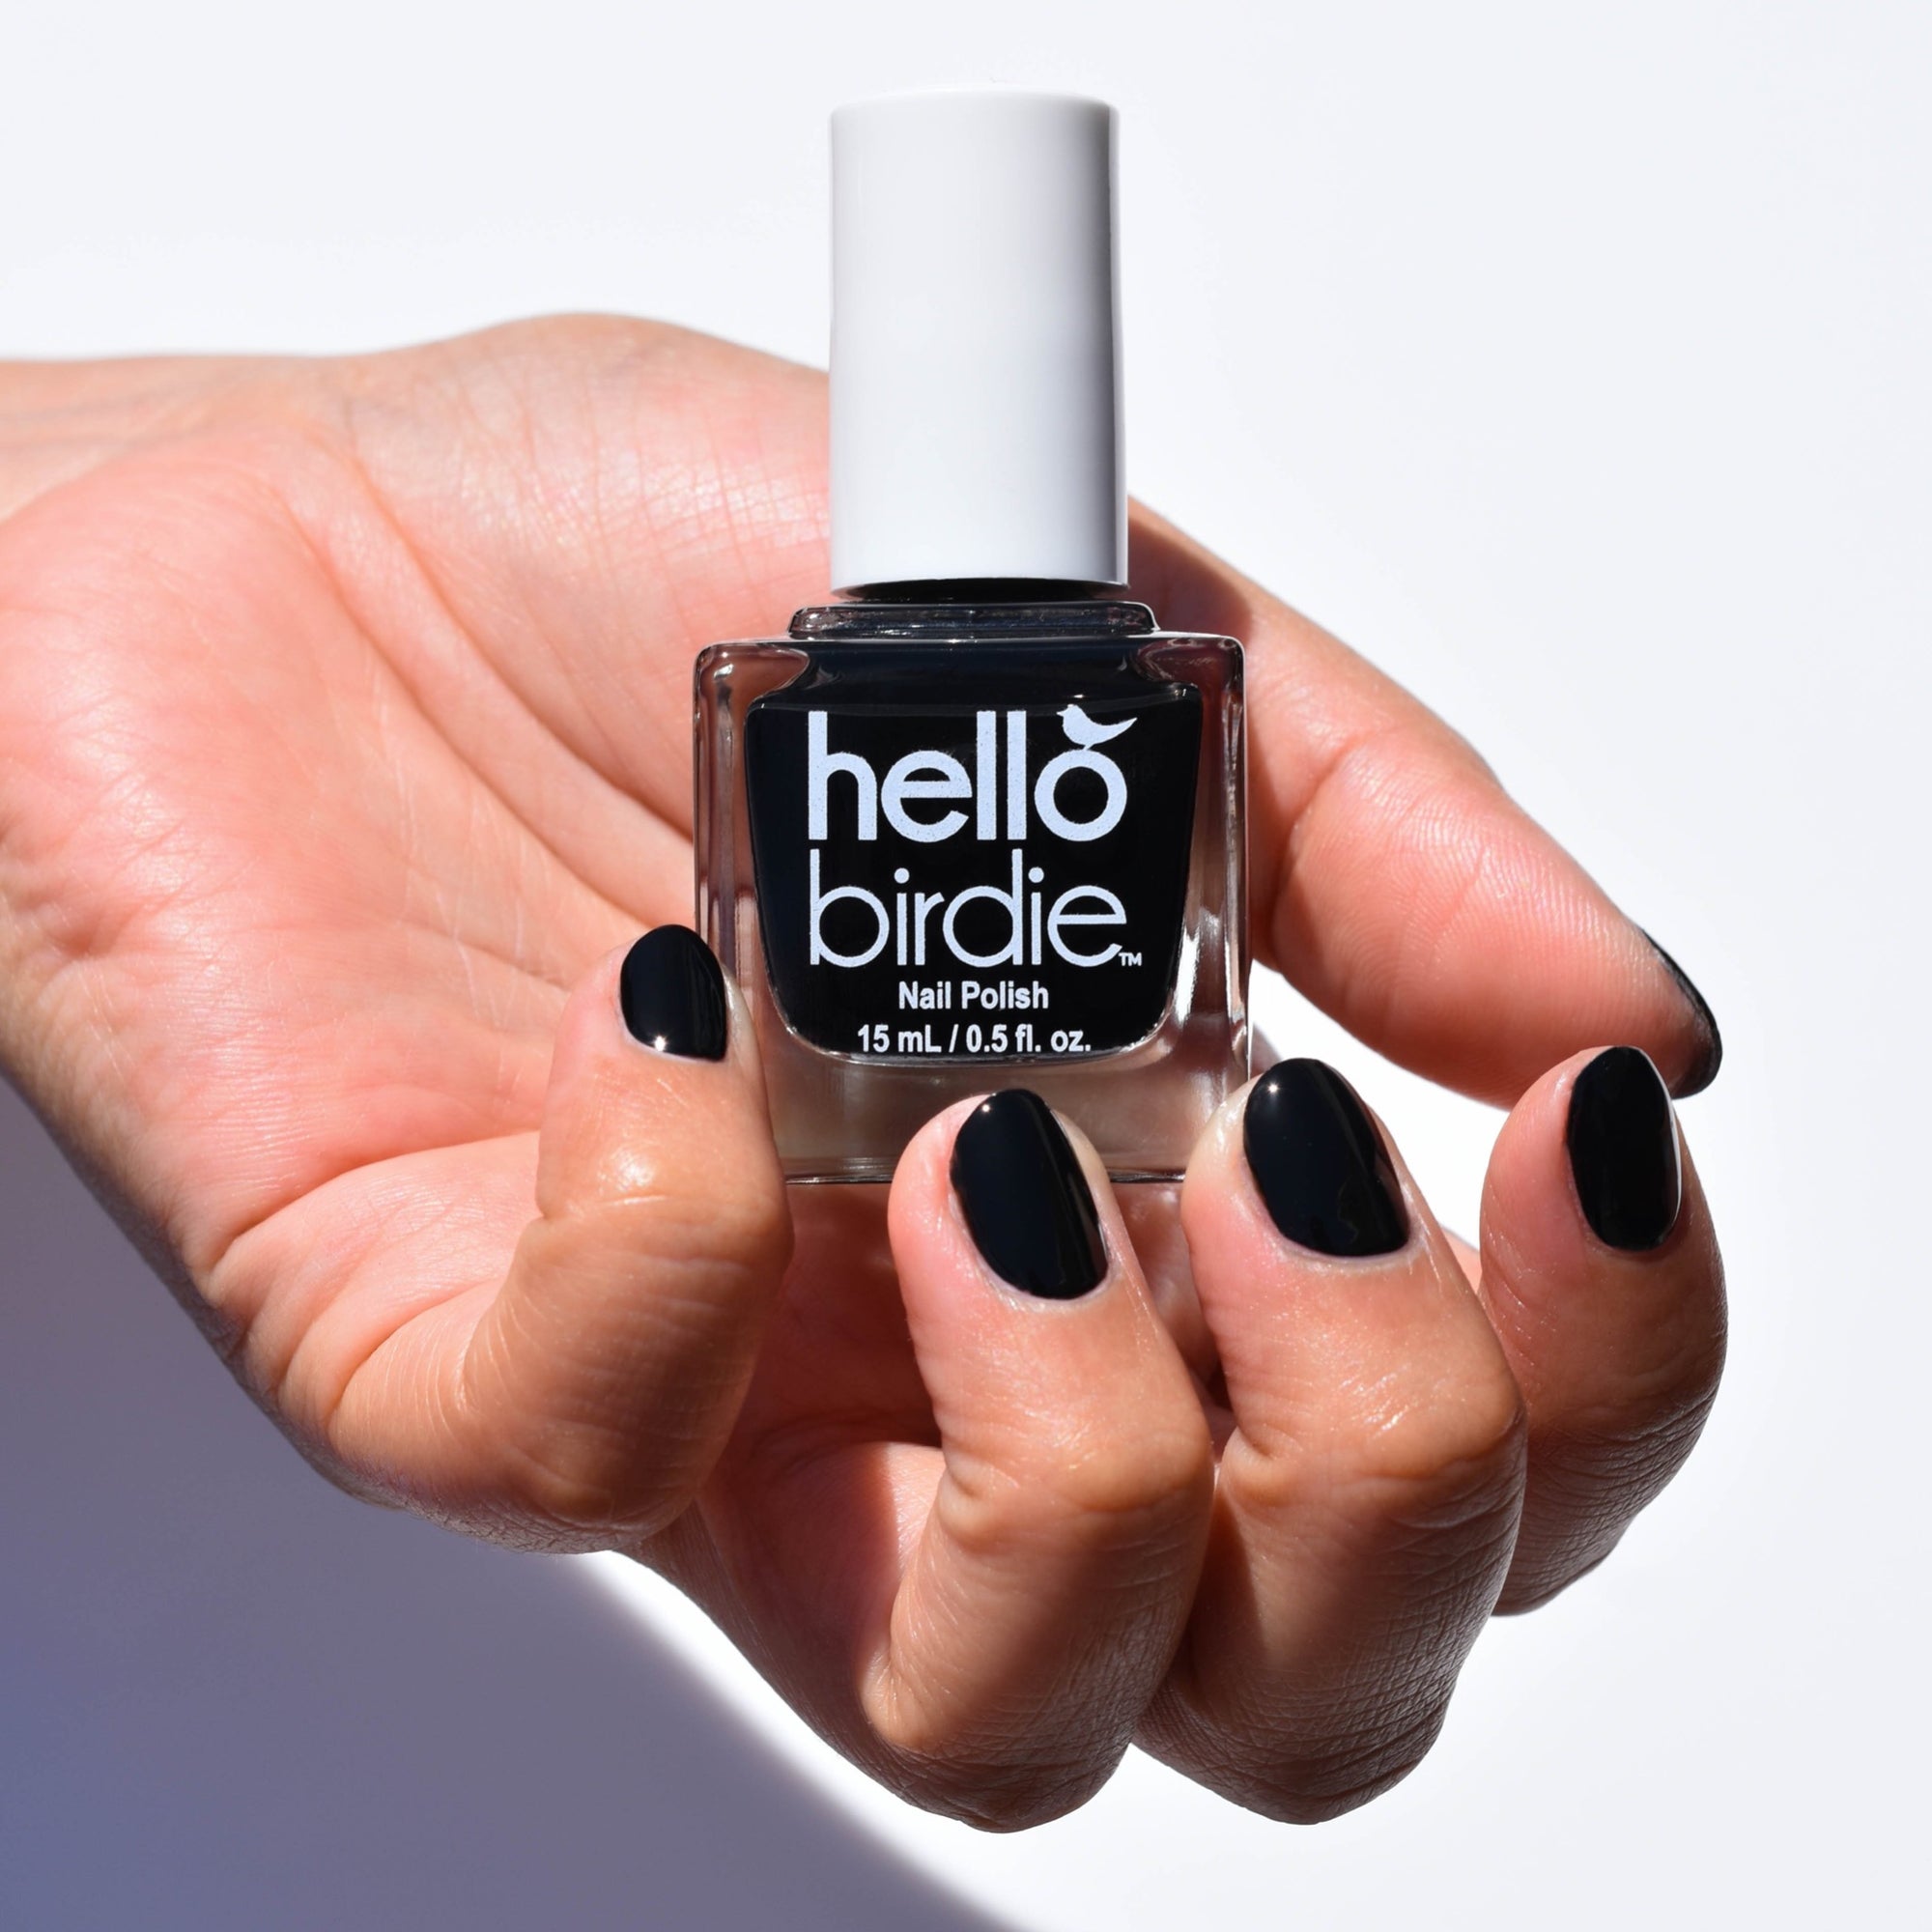 A Close up of a model's hand holding a bottle of Nevermore Nail Polish from Hello Birdie in the palm. The hand has a medium skin tone and the nails are painted with Nevermore, a deep black polish. Hard light falls on the hand with a white background and shadow underneath.